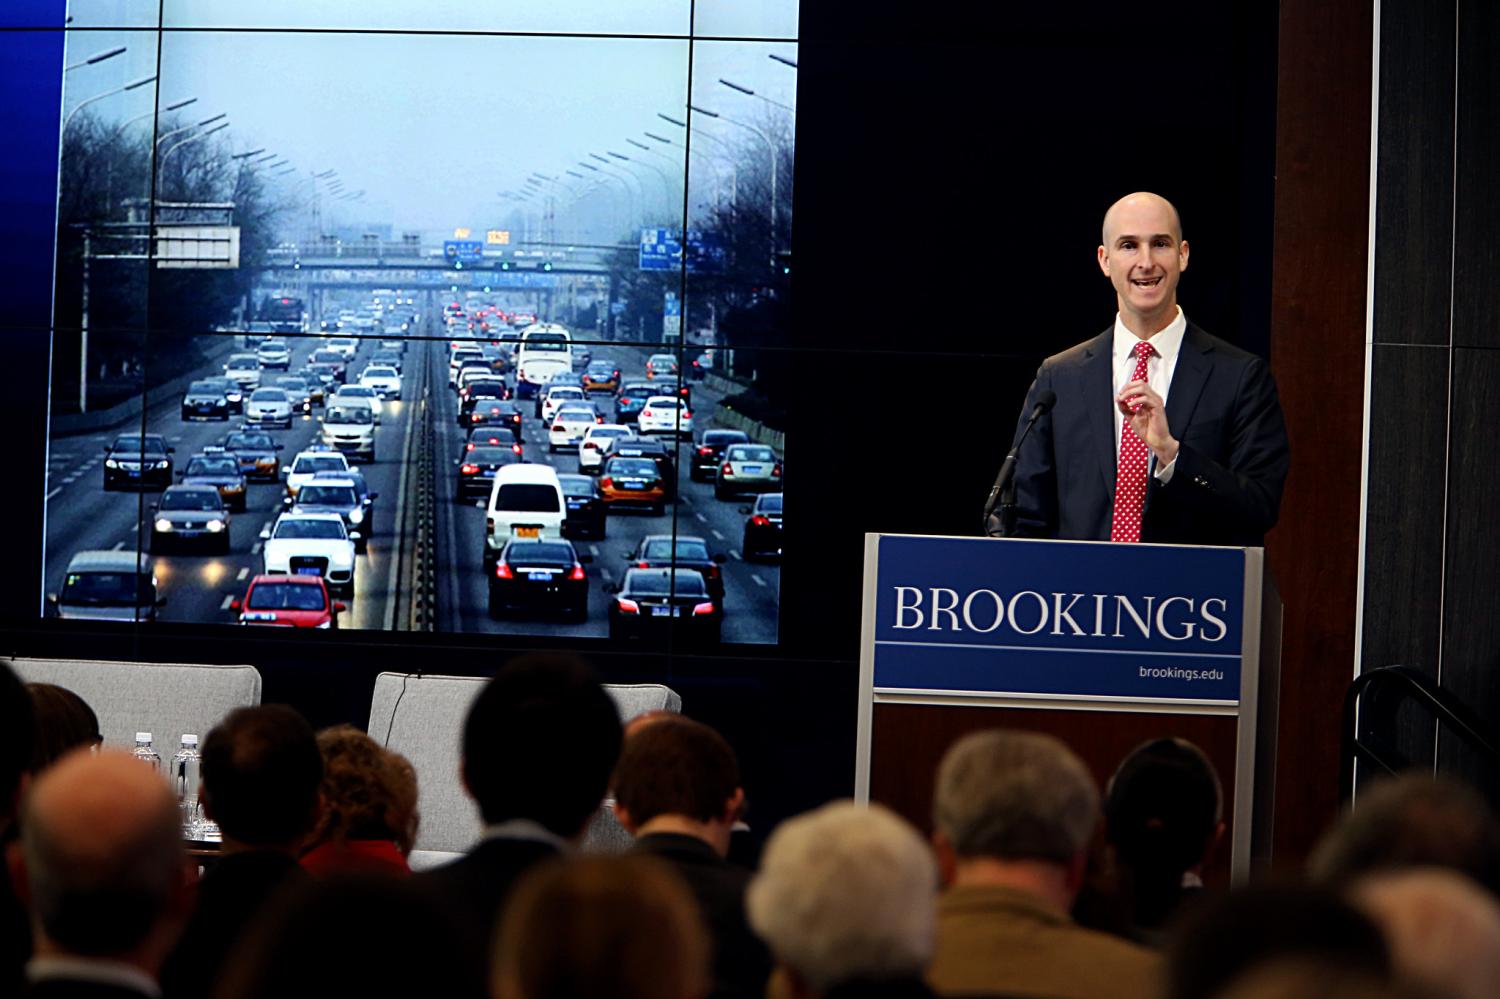 Brookings Metro expert Adie Tomer discusses transportation issues